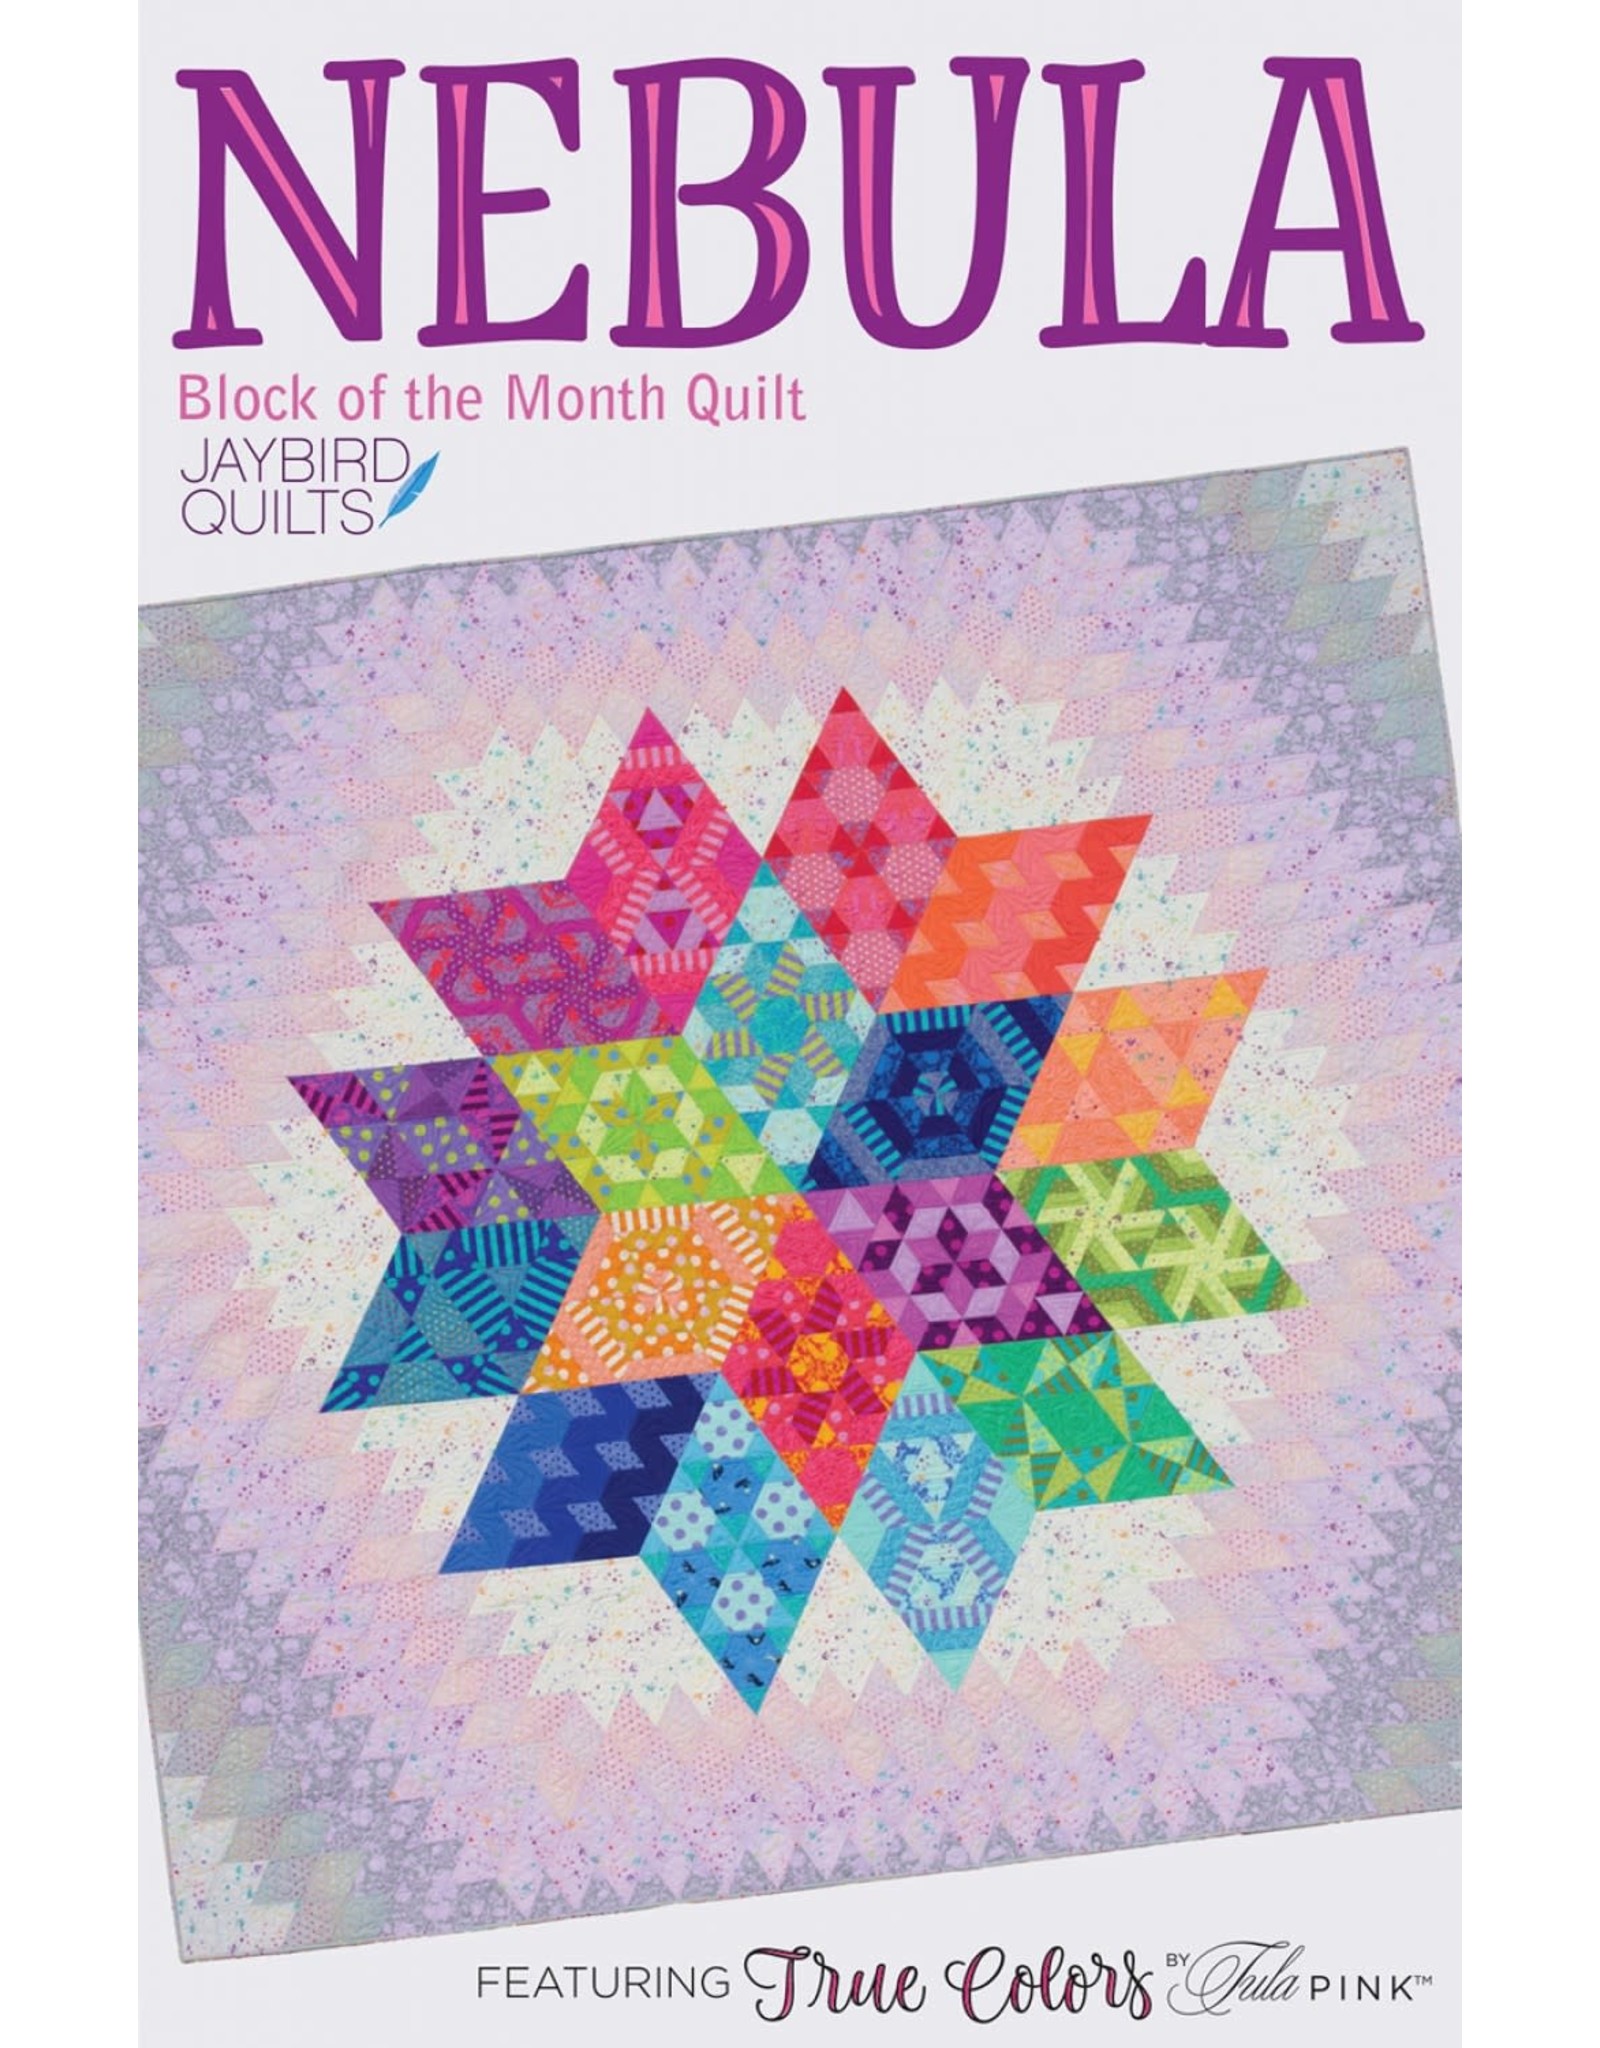 Jaybird Quilts Nebula Quilt - Block of the Month - pattern